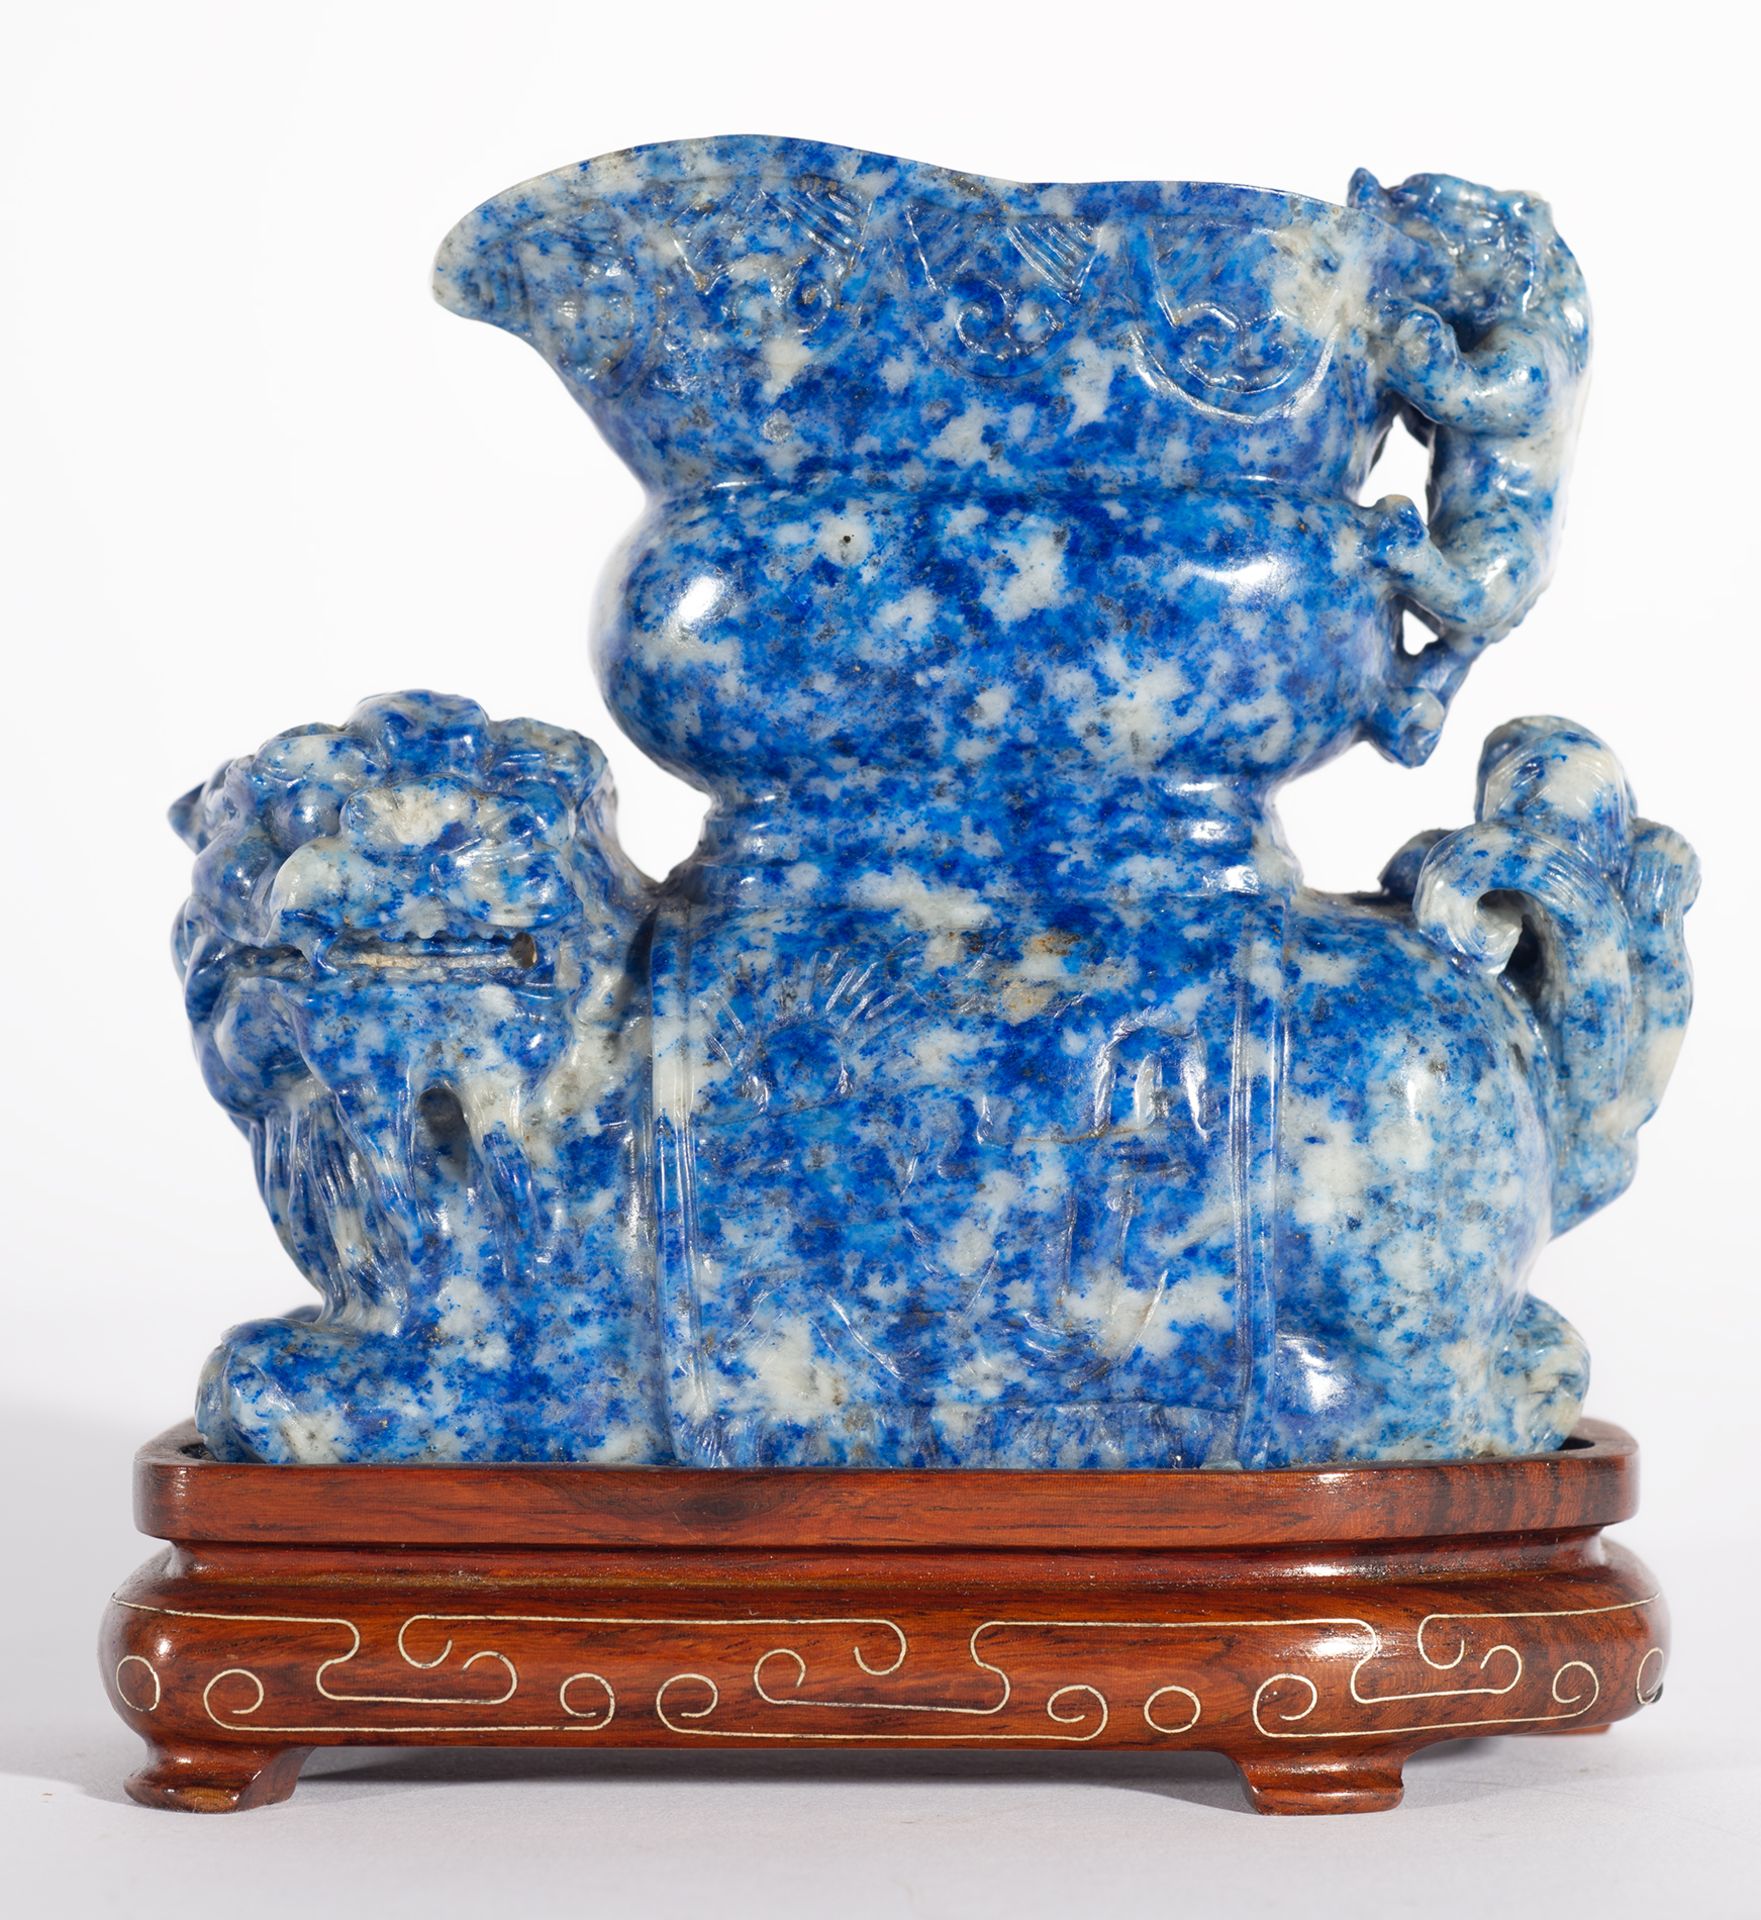 Chinese libation cup in lapis lazuli, China, early 20th century